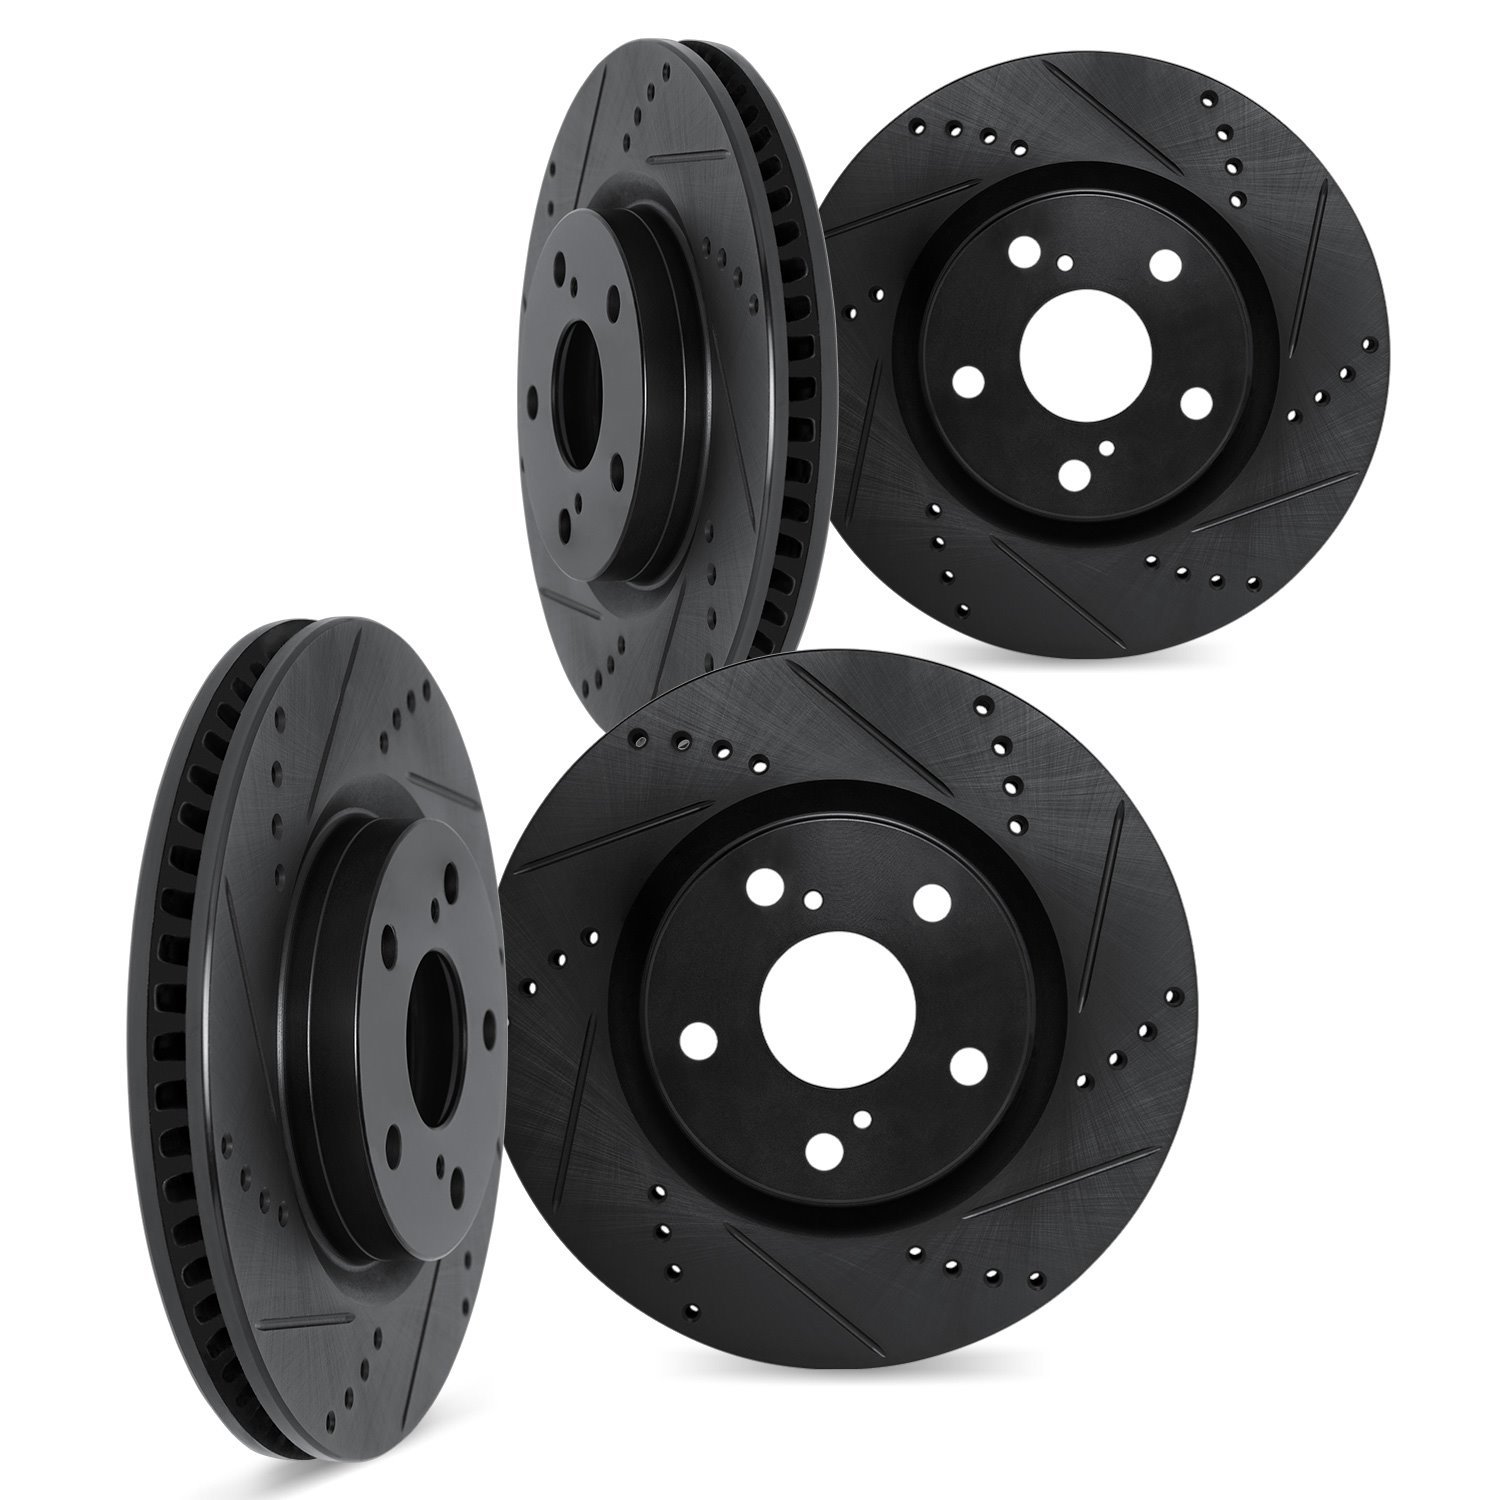 8004-54136 Drilled/Slotted Brake Rotors [Black], Fits Select Ford/Lincoln/Mercury/Mazda, Position: Front and Rear